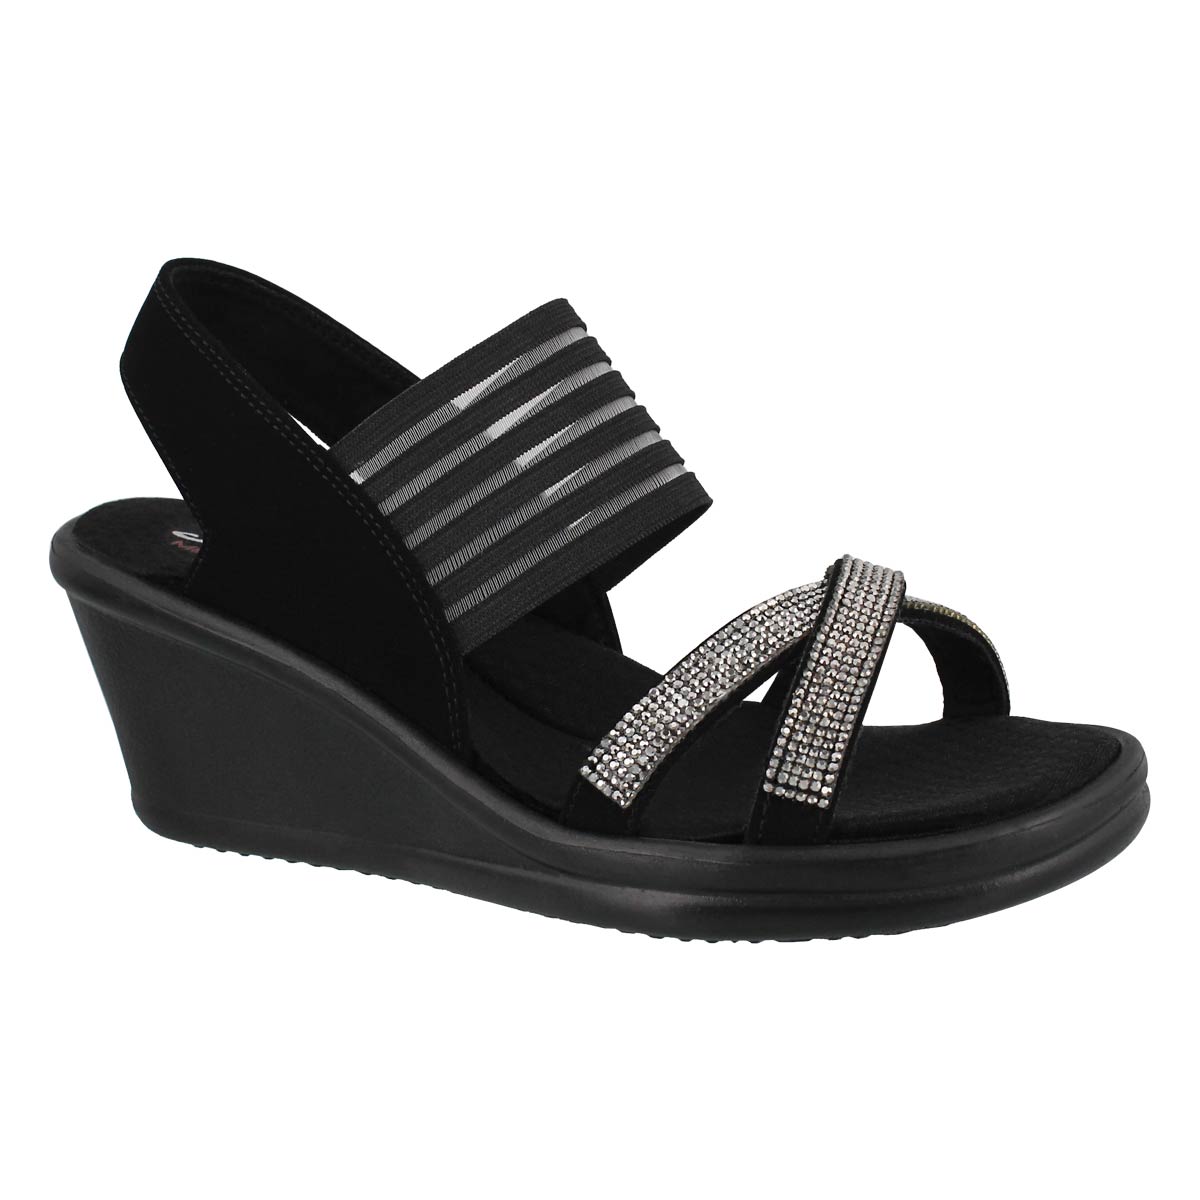 skechers black wedge sandals with 